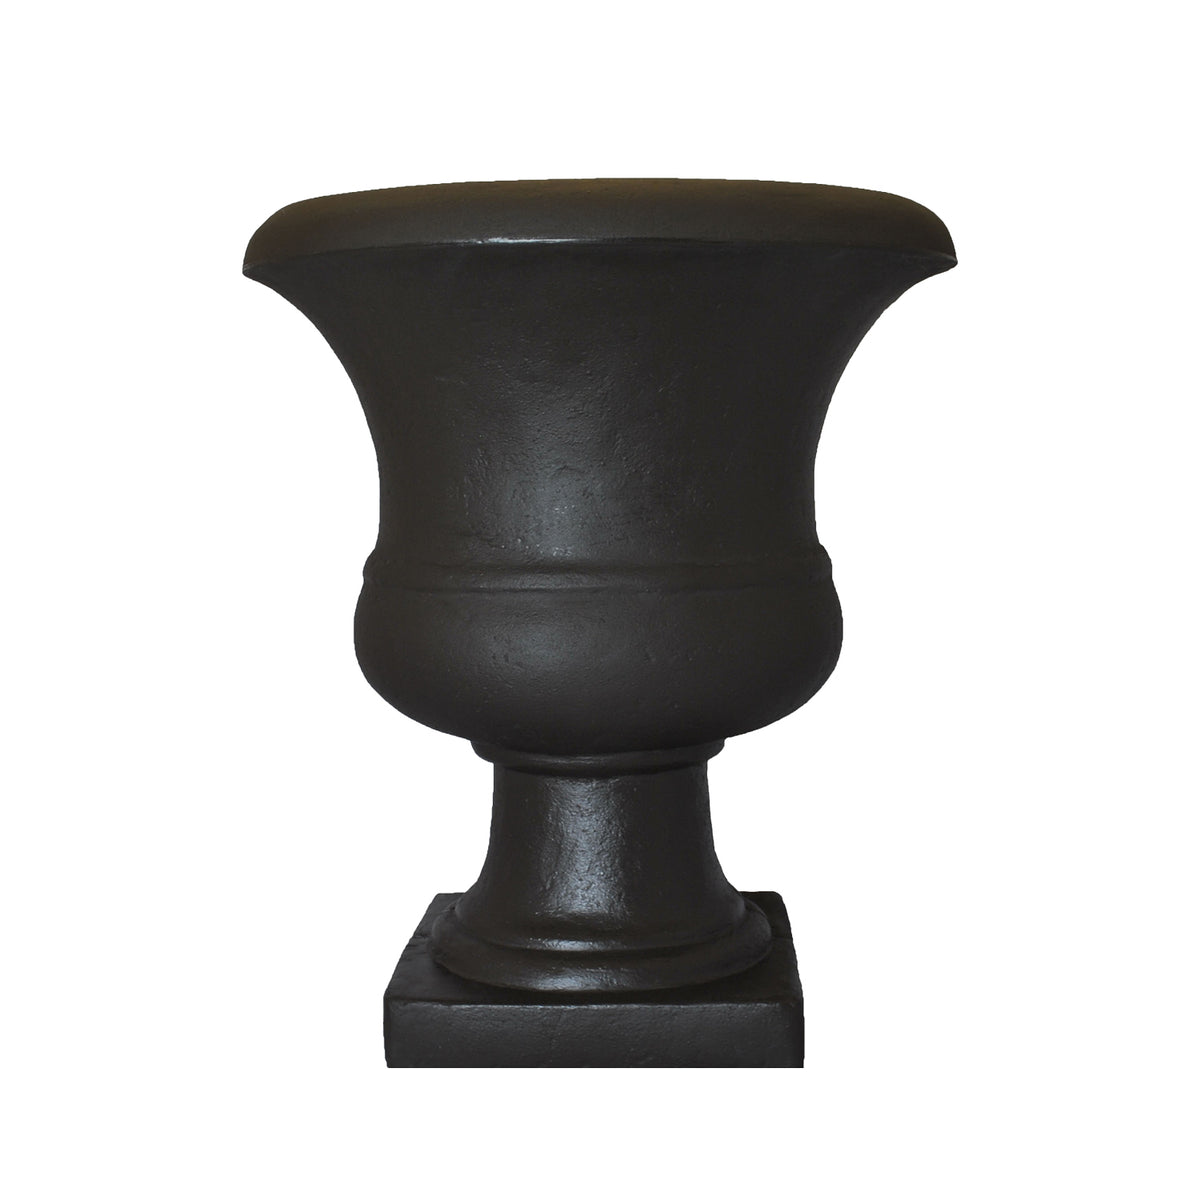 Small Urn | Garden Planter - Tusco Products